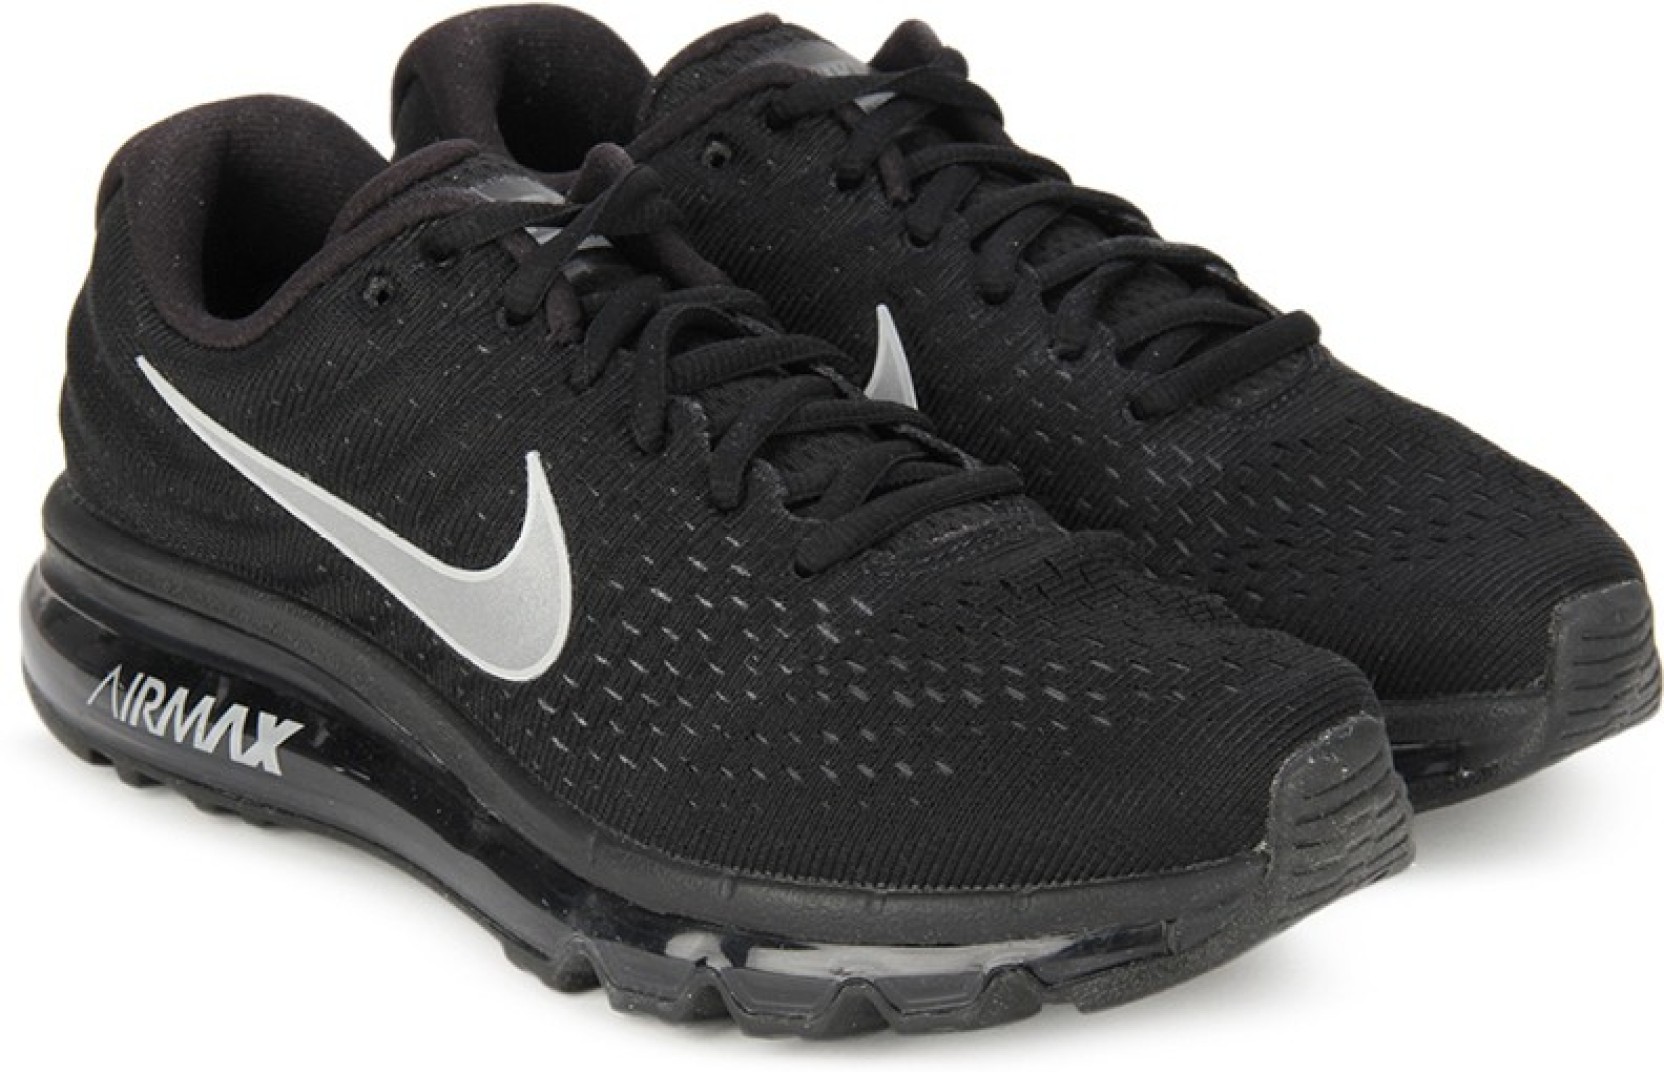 Nike WMNS NIKE AIR MAX 2017 Running Shoes - Buy BLACK/WHITE Color Nike ...